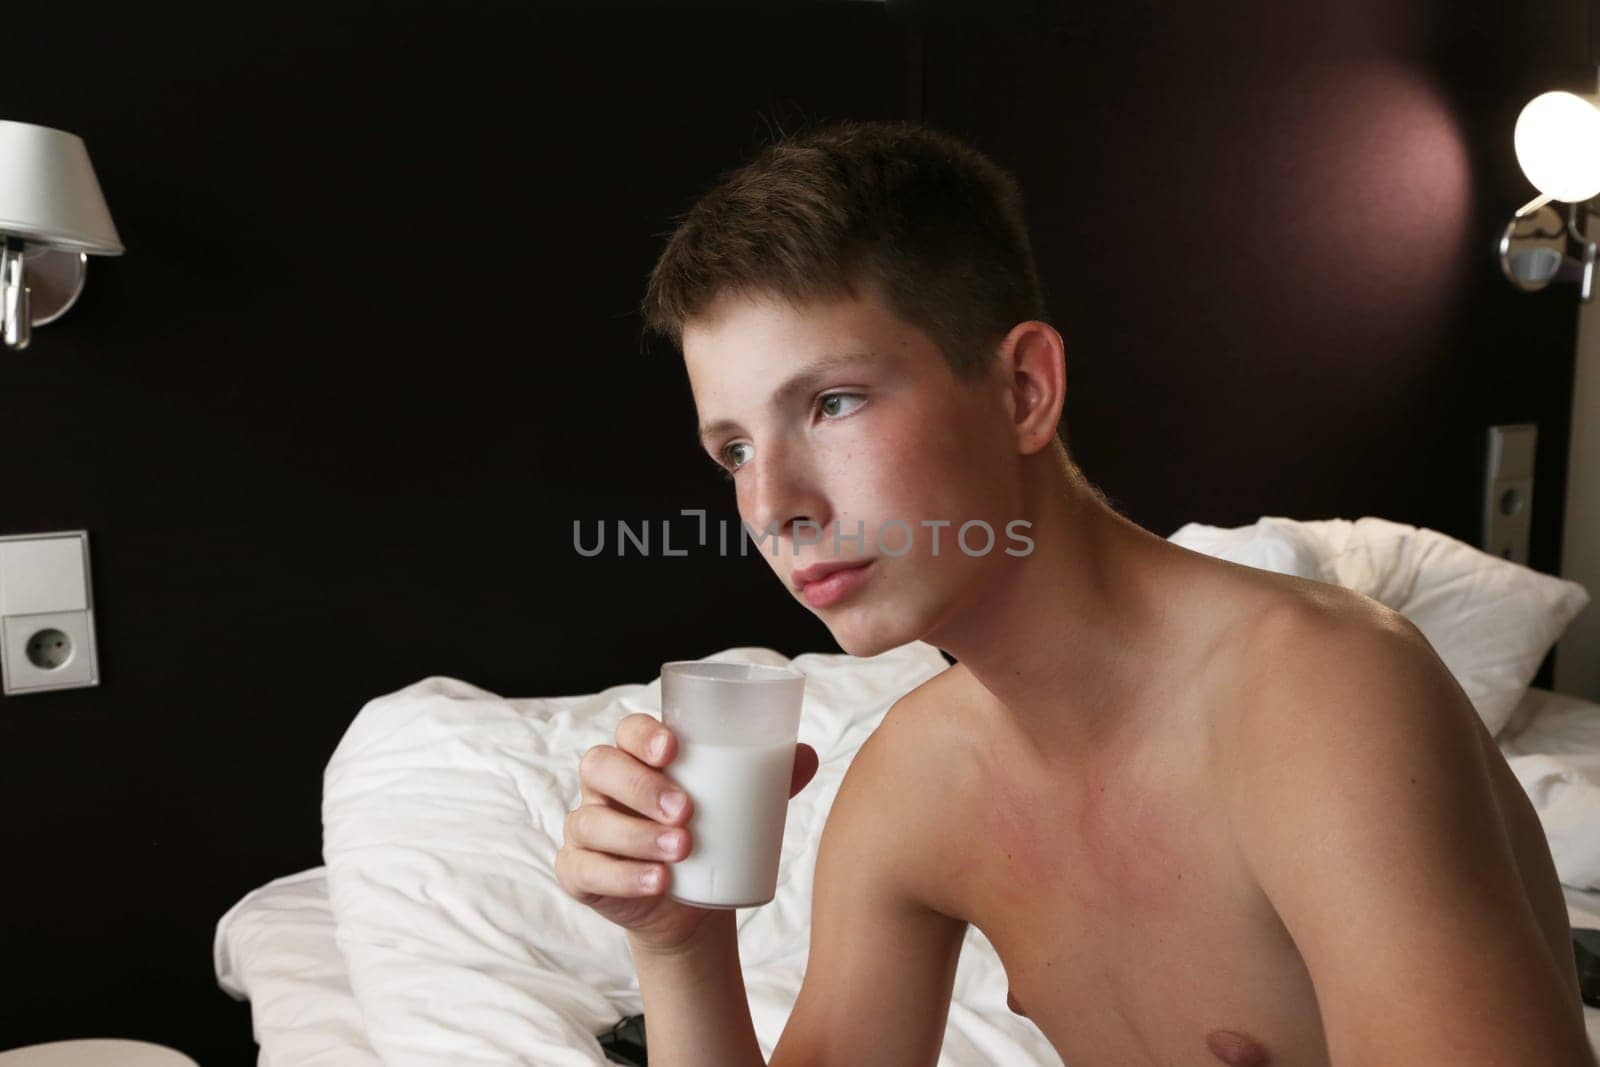 European boy sits on the bed and holds a glass. by gelog67